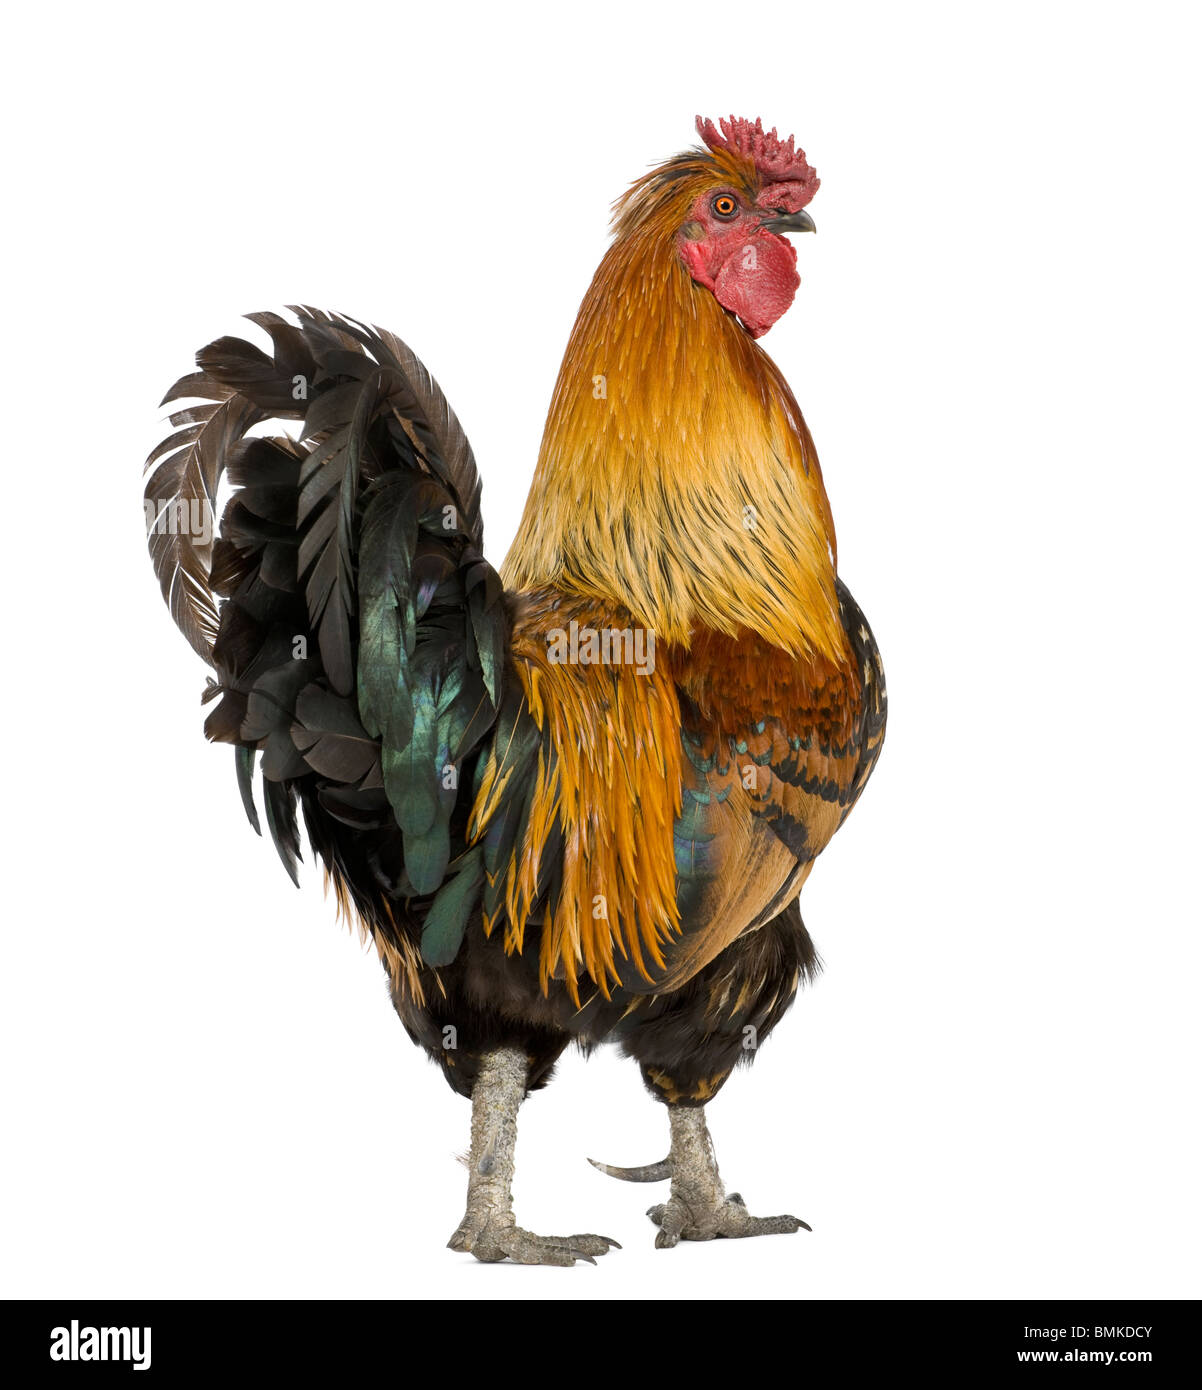 Gallic rooster, 5 years old, standing in front of white background Stock Photo